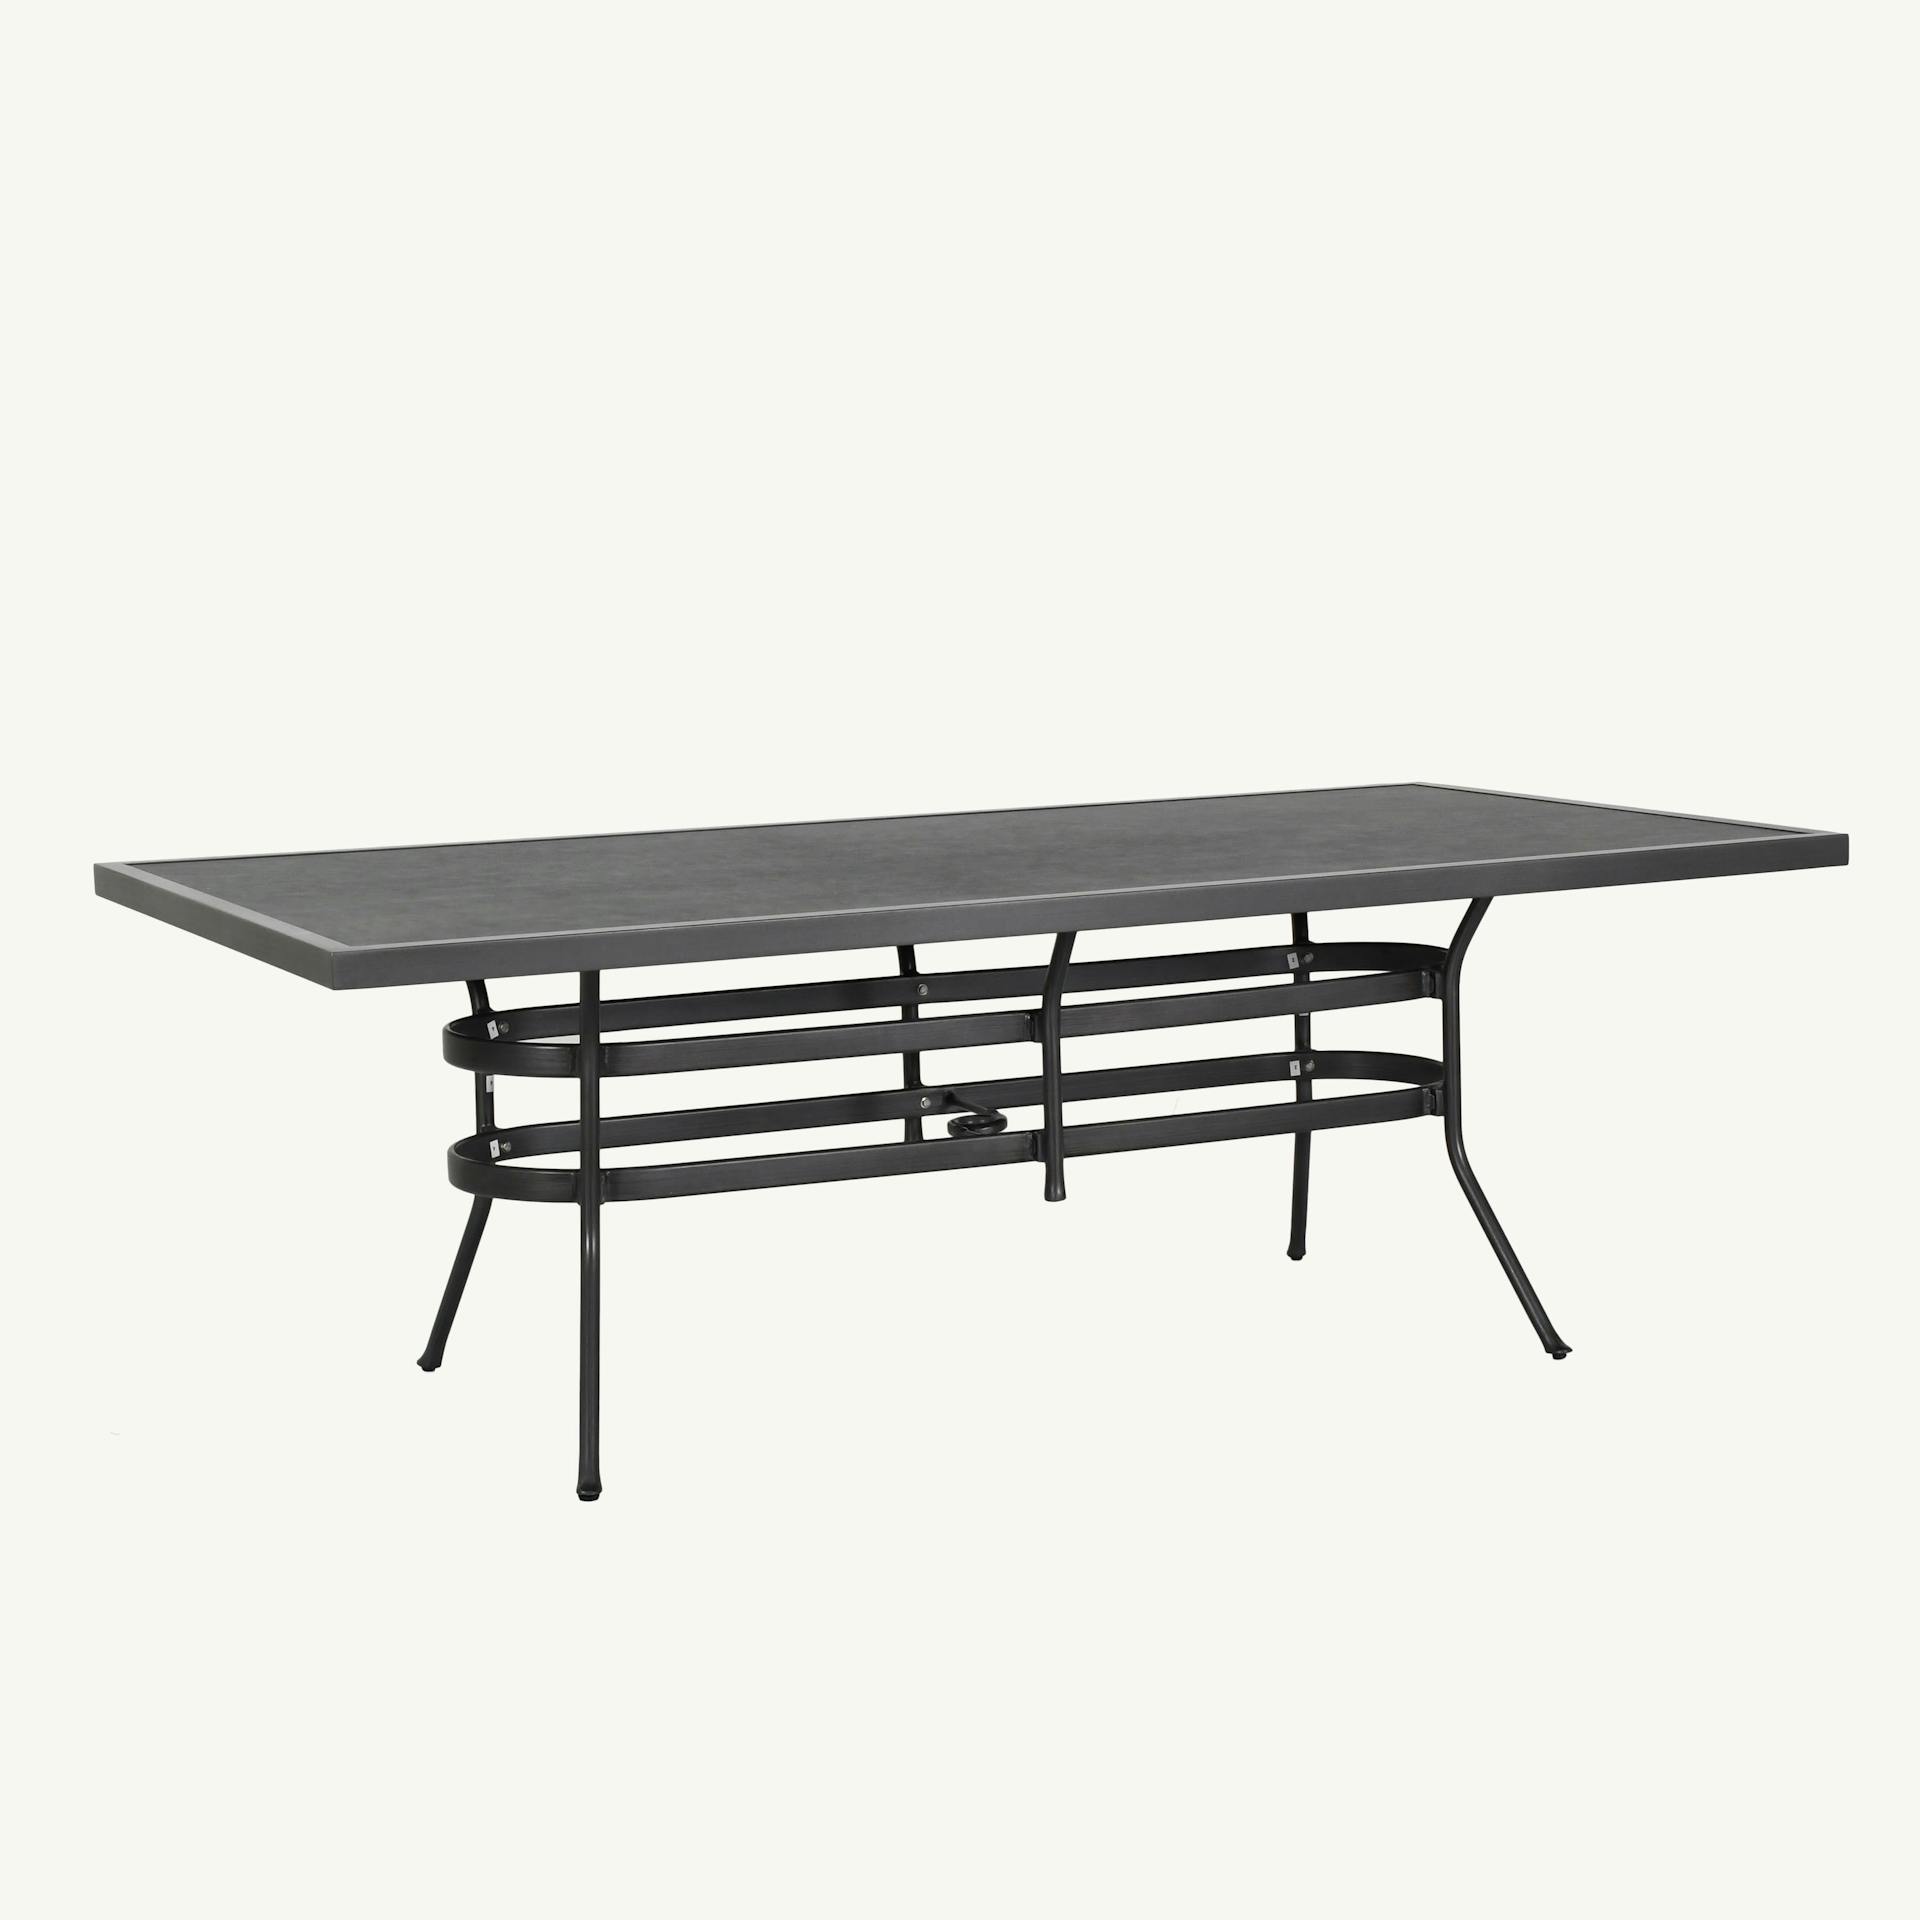 Marquis Tables 42" X 84" Rectangular Dining Table